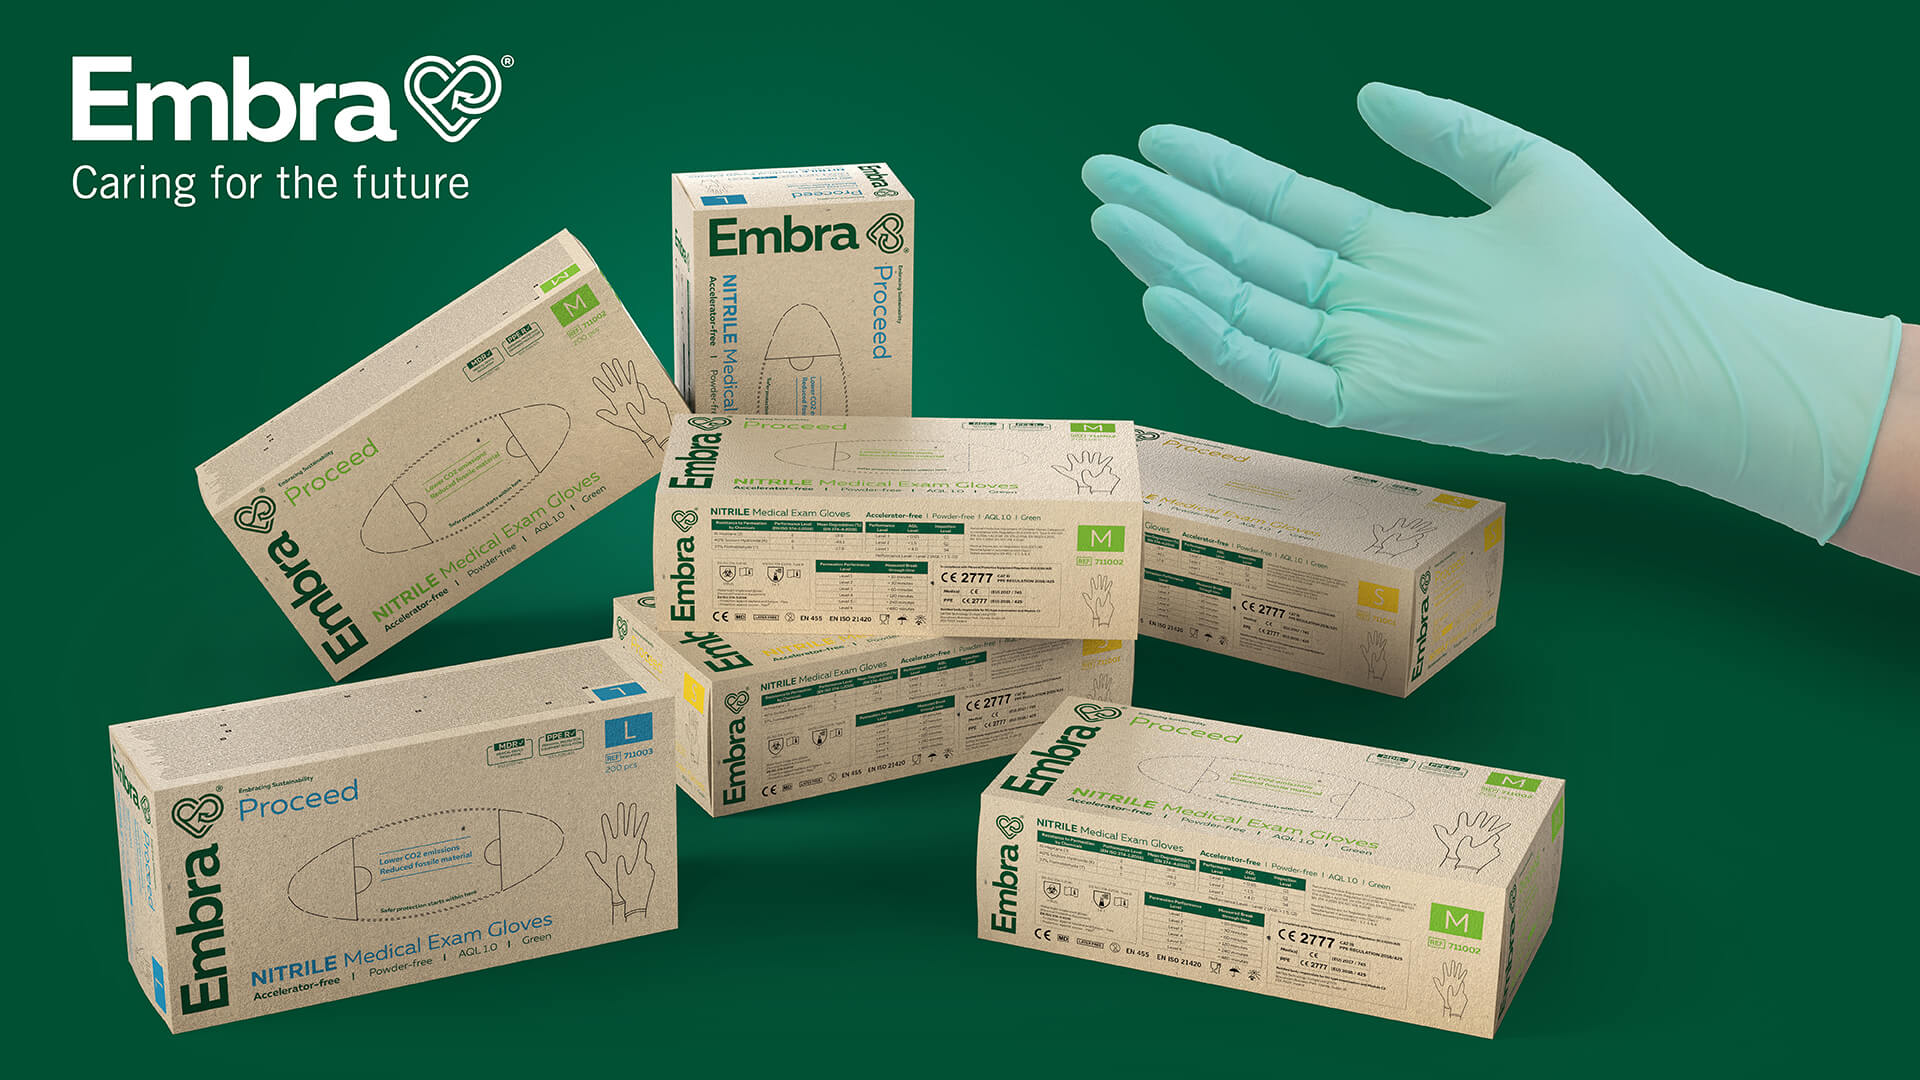 hand wearing a Embra Proceed glove beside 3D gloves dispenser box and Embra logotype with tagline 